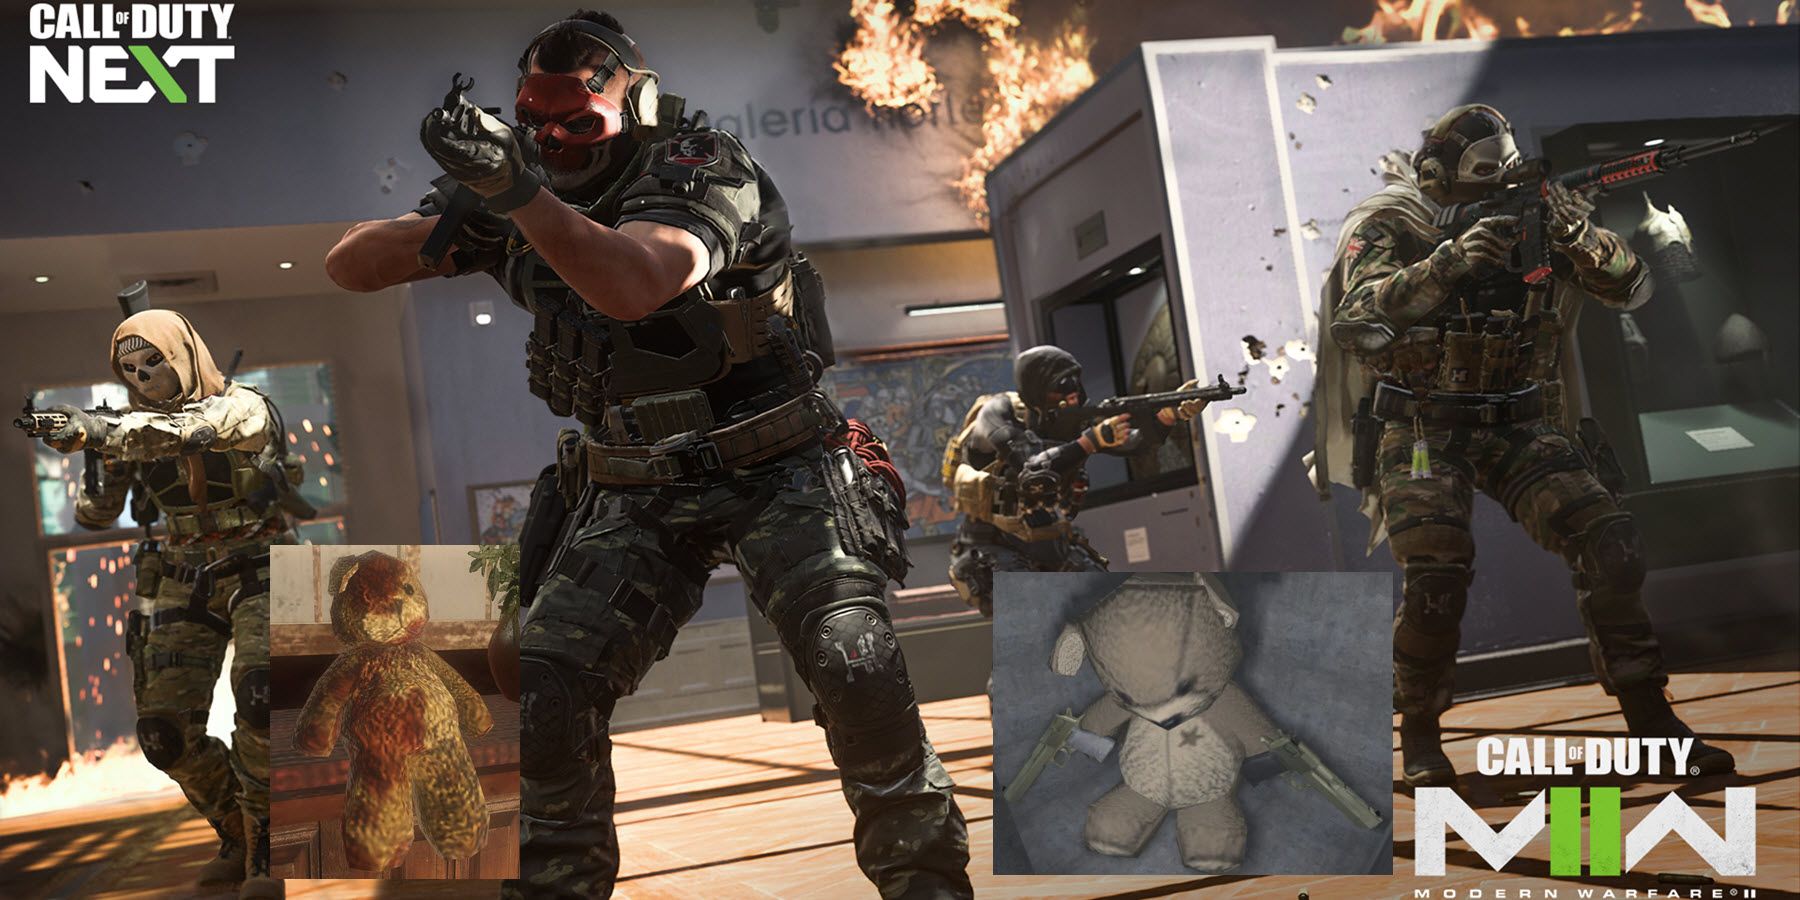 Call of Duty Modern Warfare 2 Players Spot Teddy Bear Easter Egg in Campaign